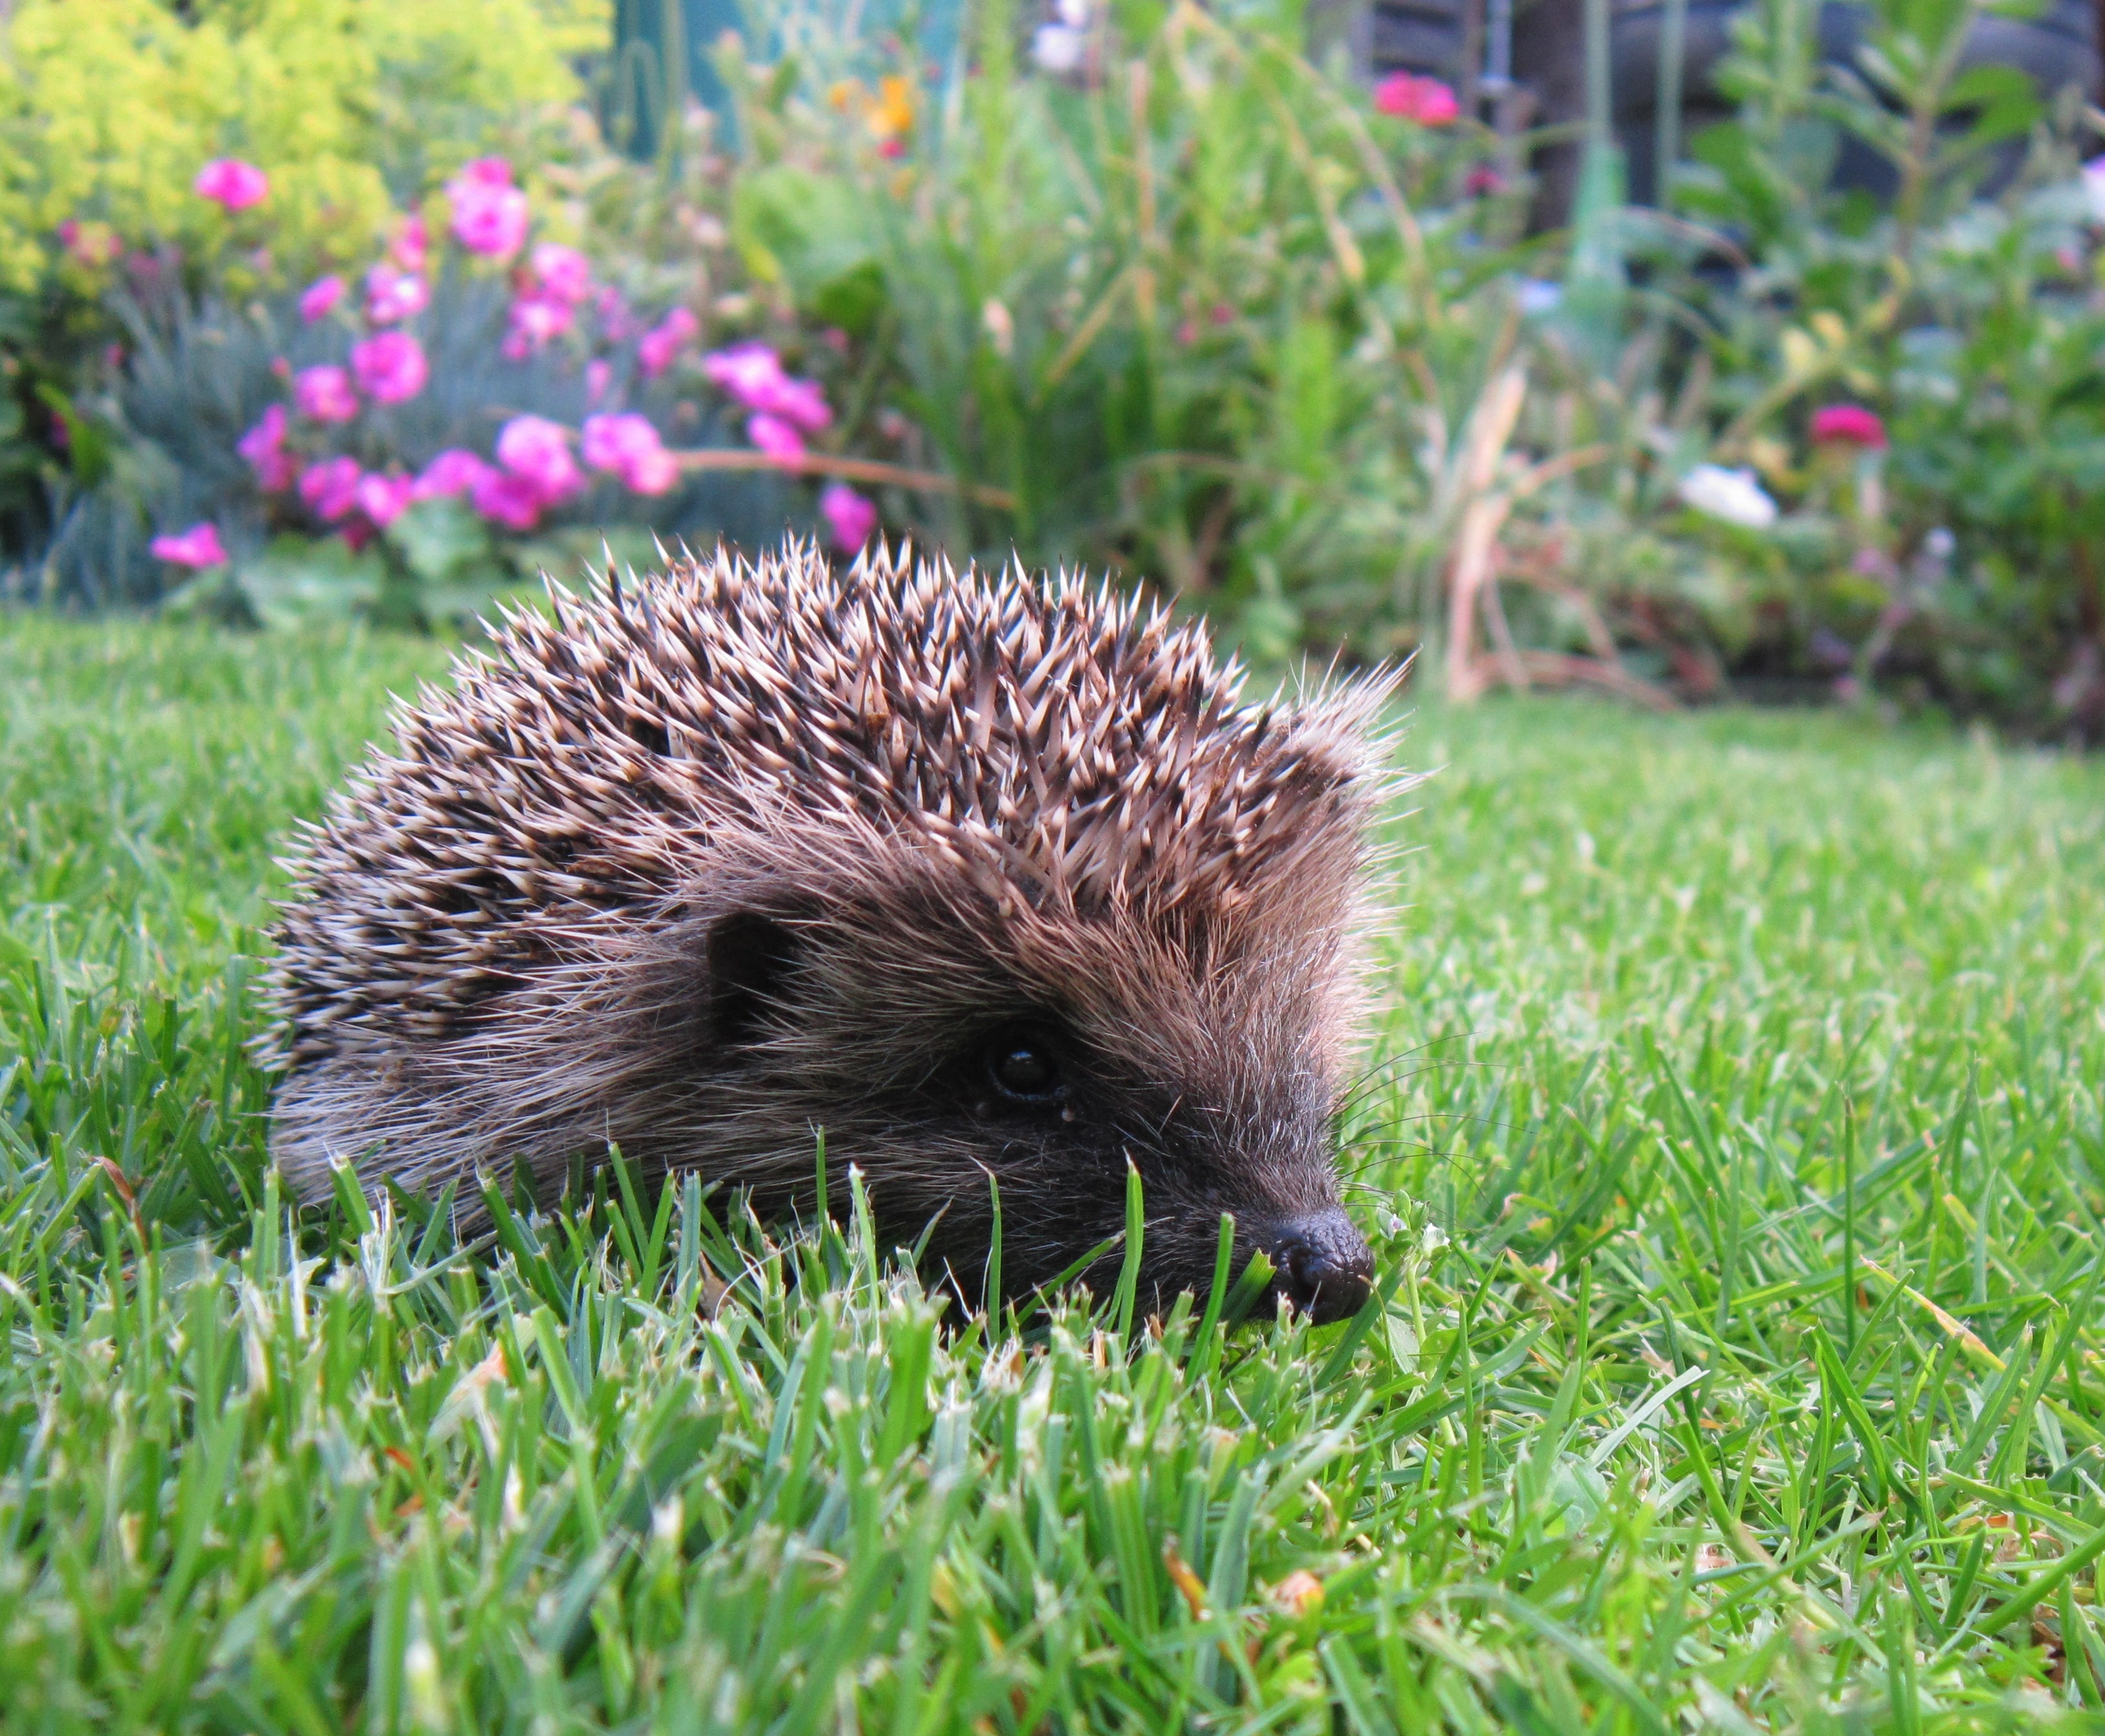 Lyndsey Smith got her parents to make a hole in their fence - and hoglets turned up.